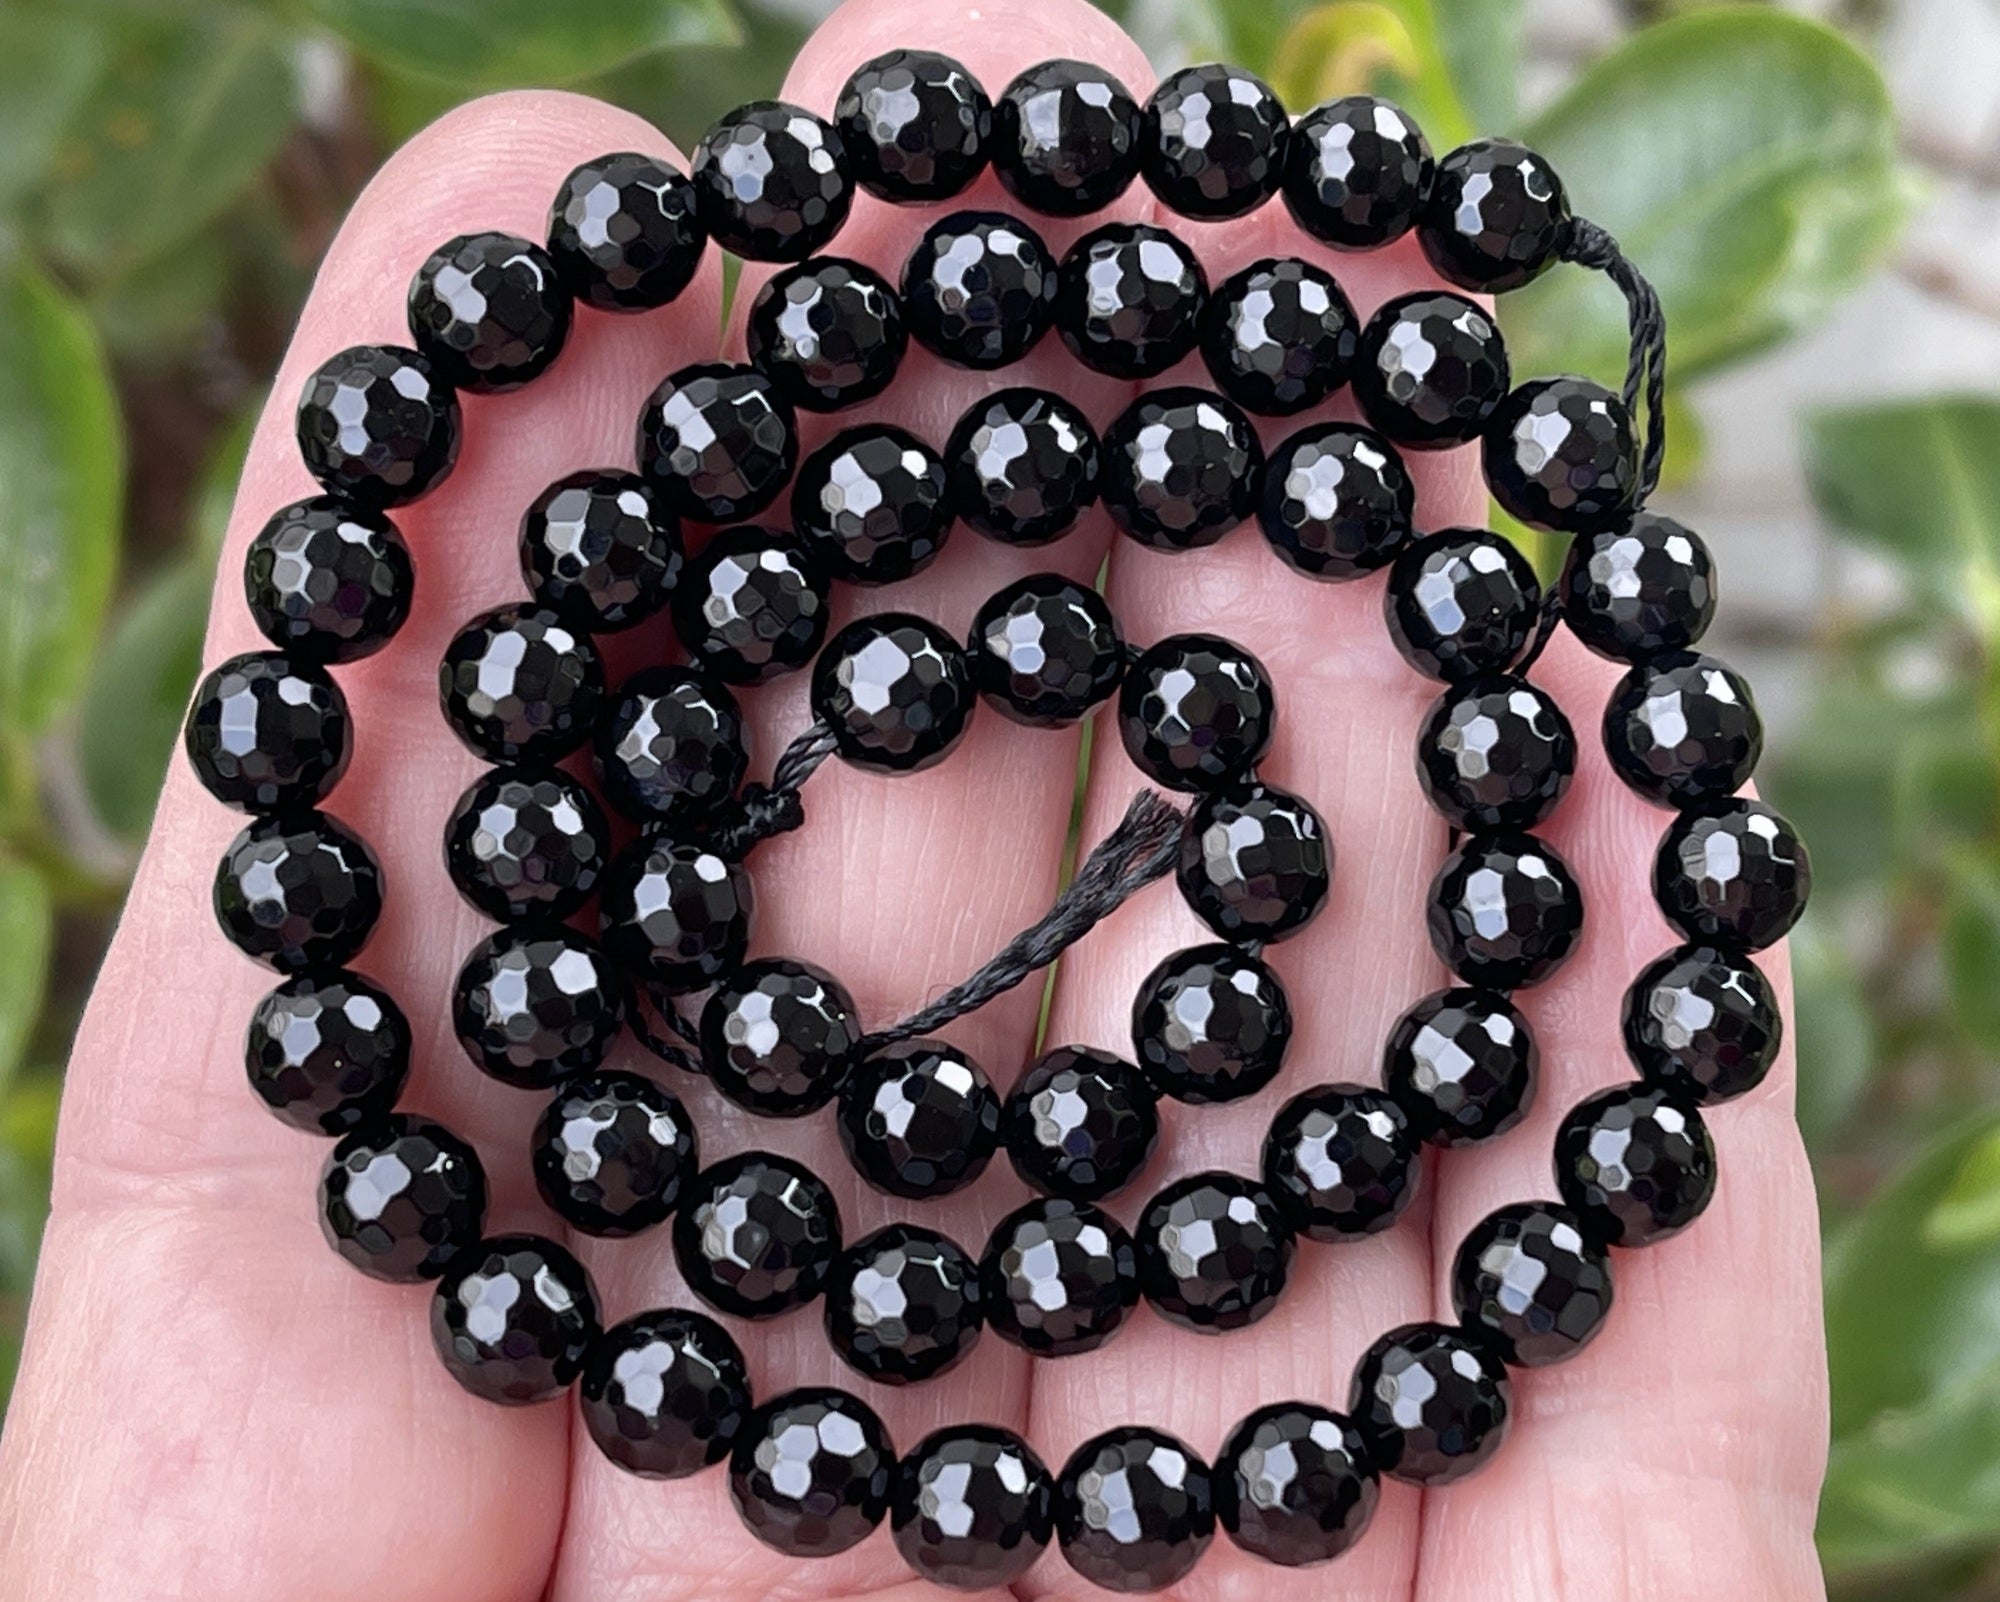 Black Onyx 6mm round micro faceted gemstone beads 15" strand